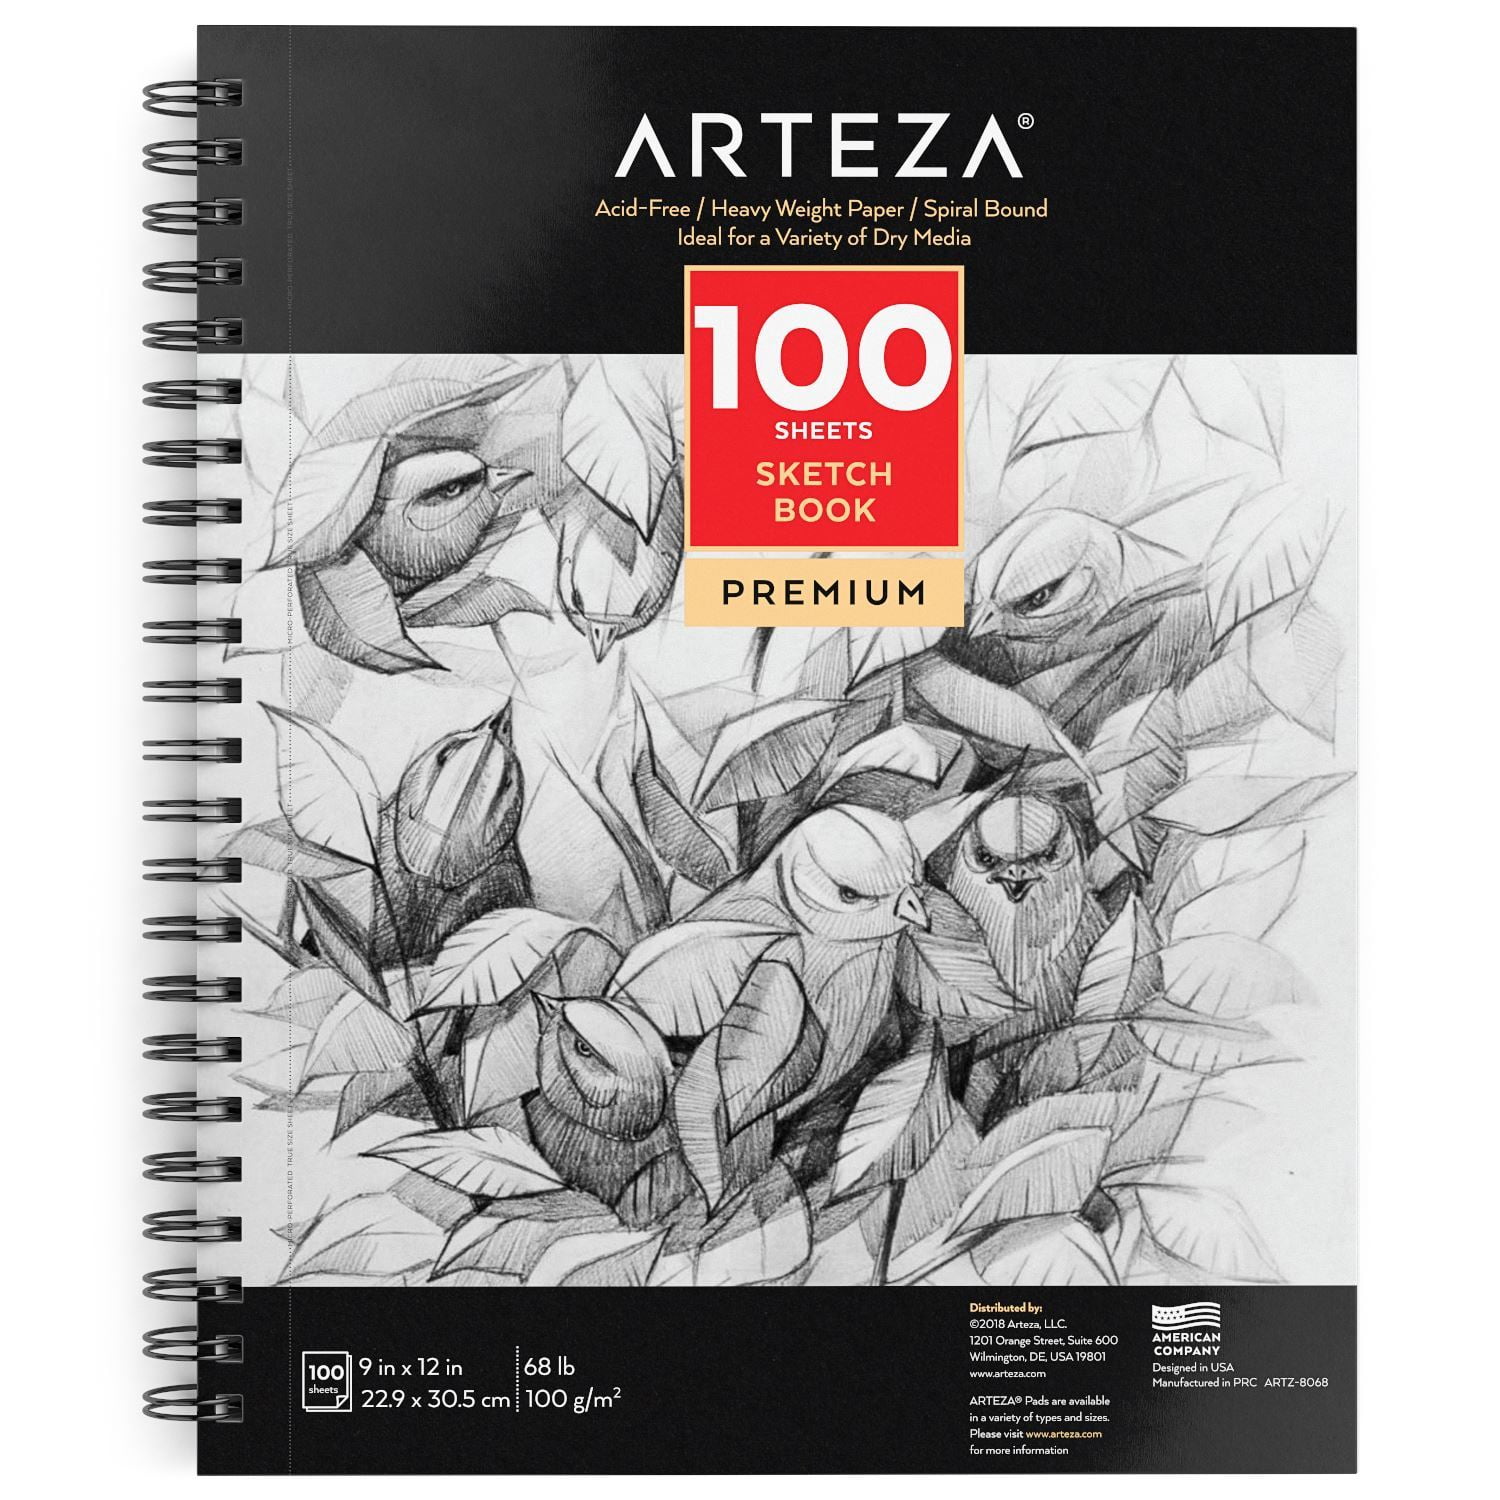 Durable Acid Free Drawing Paper Ideal for Kids & Adults 100 Sheets Each 200 Pages Total Bright White Two Spiral Bound Artist Sketch Pad Arteza 9X12 Sketch Book 2 Pack 68 lb./100gsm